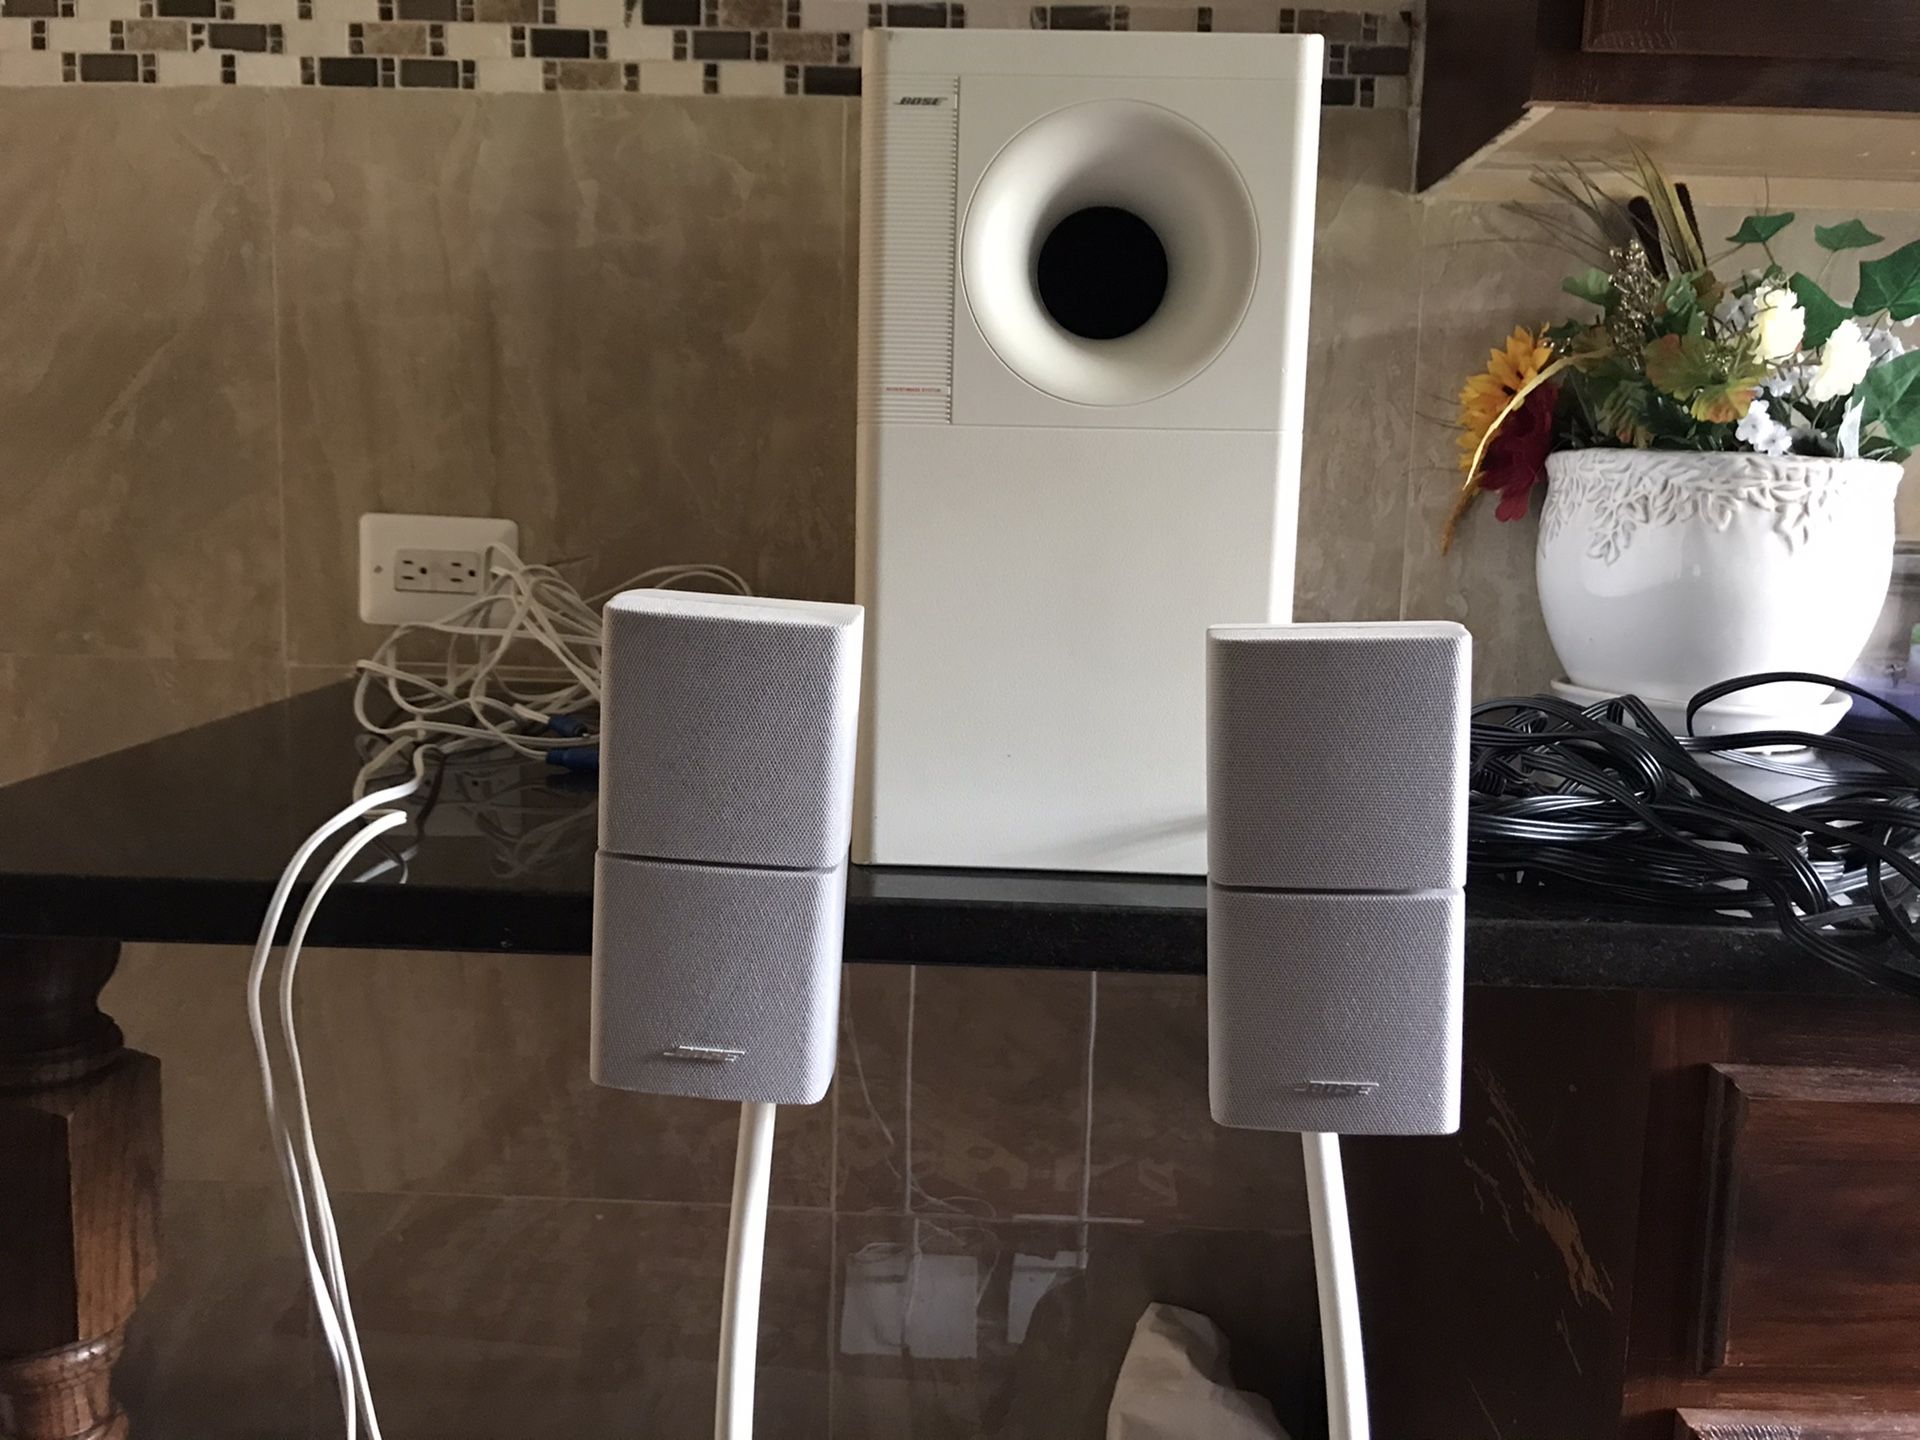 Bose acoustimass 5 series IV powered speakers.